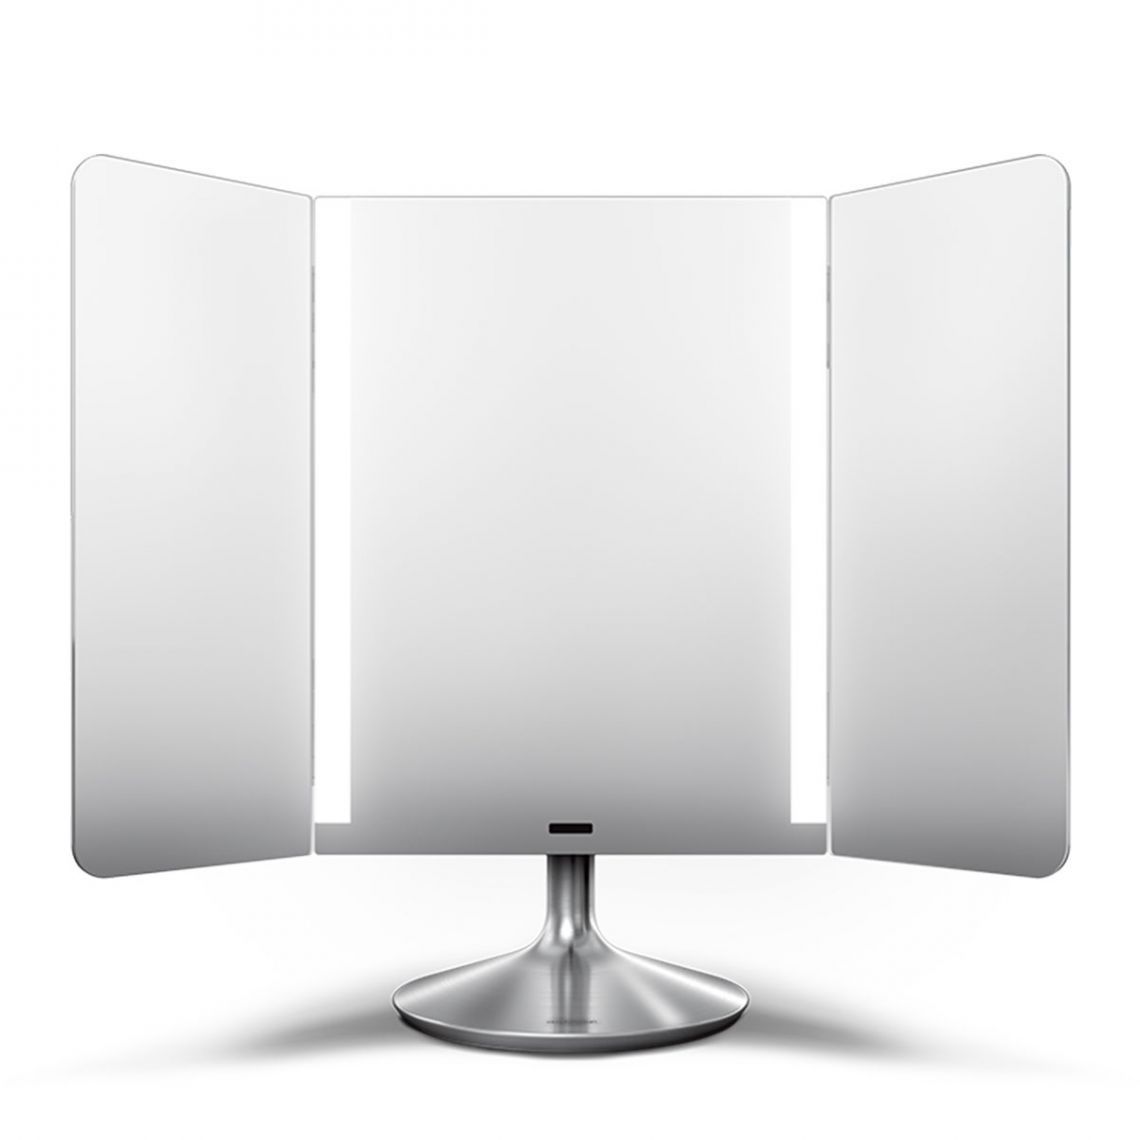 5 makeup mirrors that will satisfy every budget & vanity